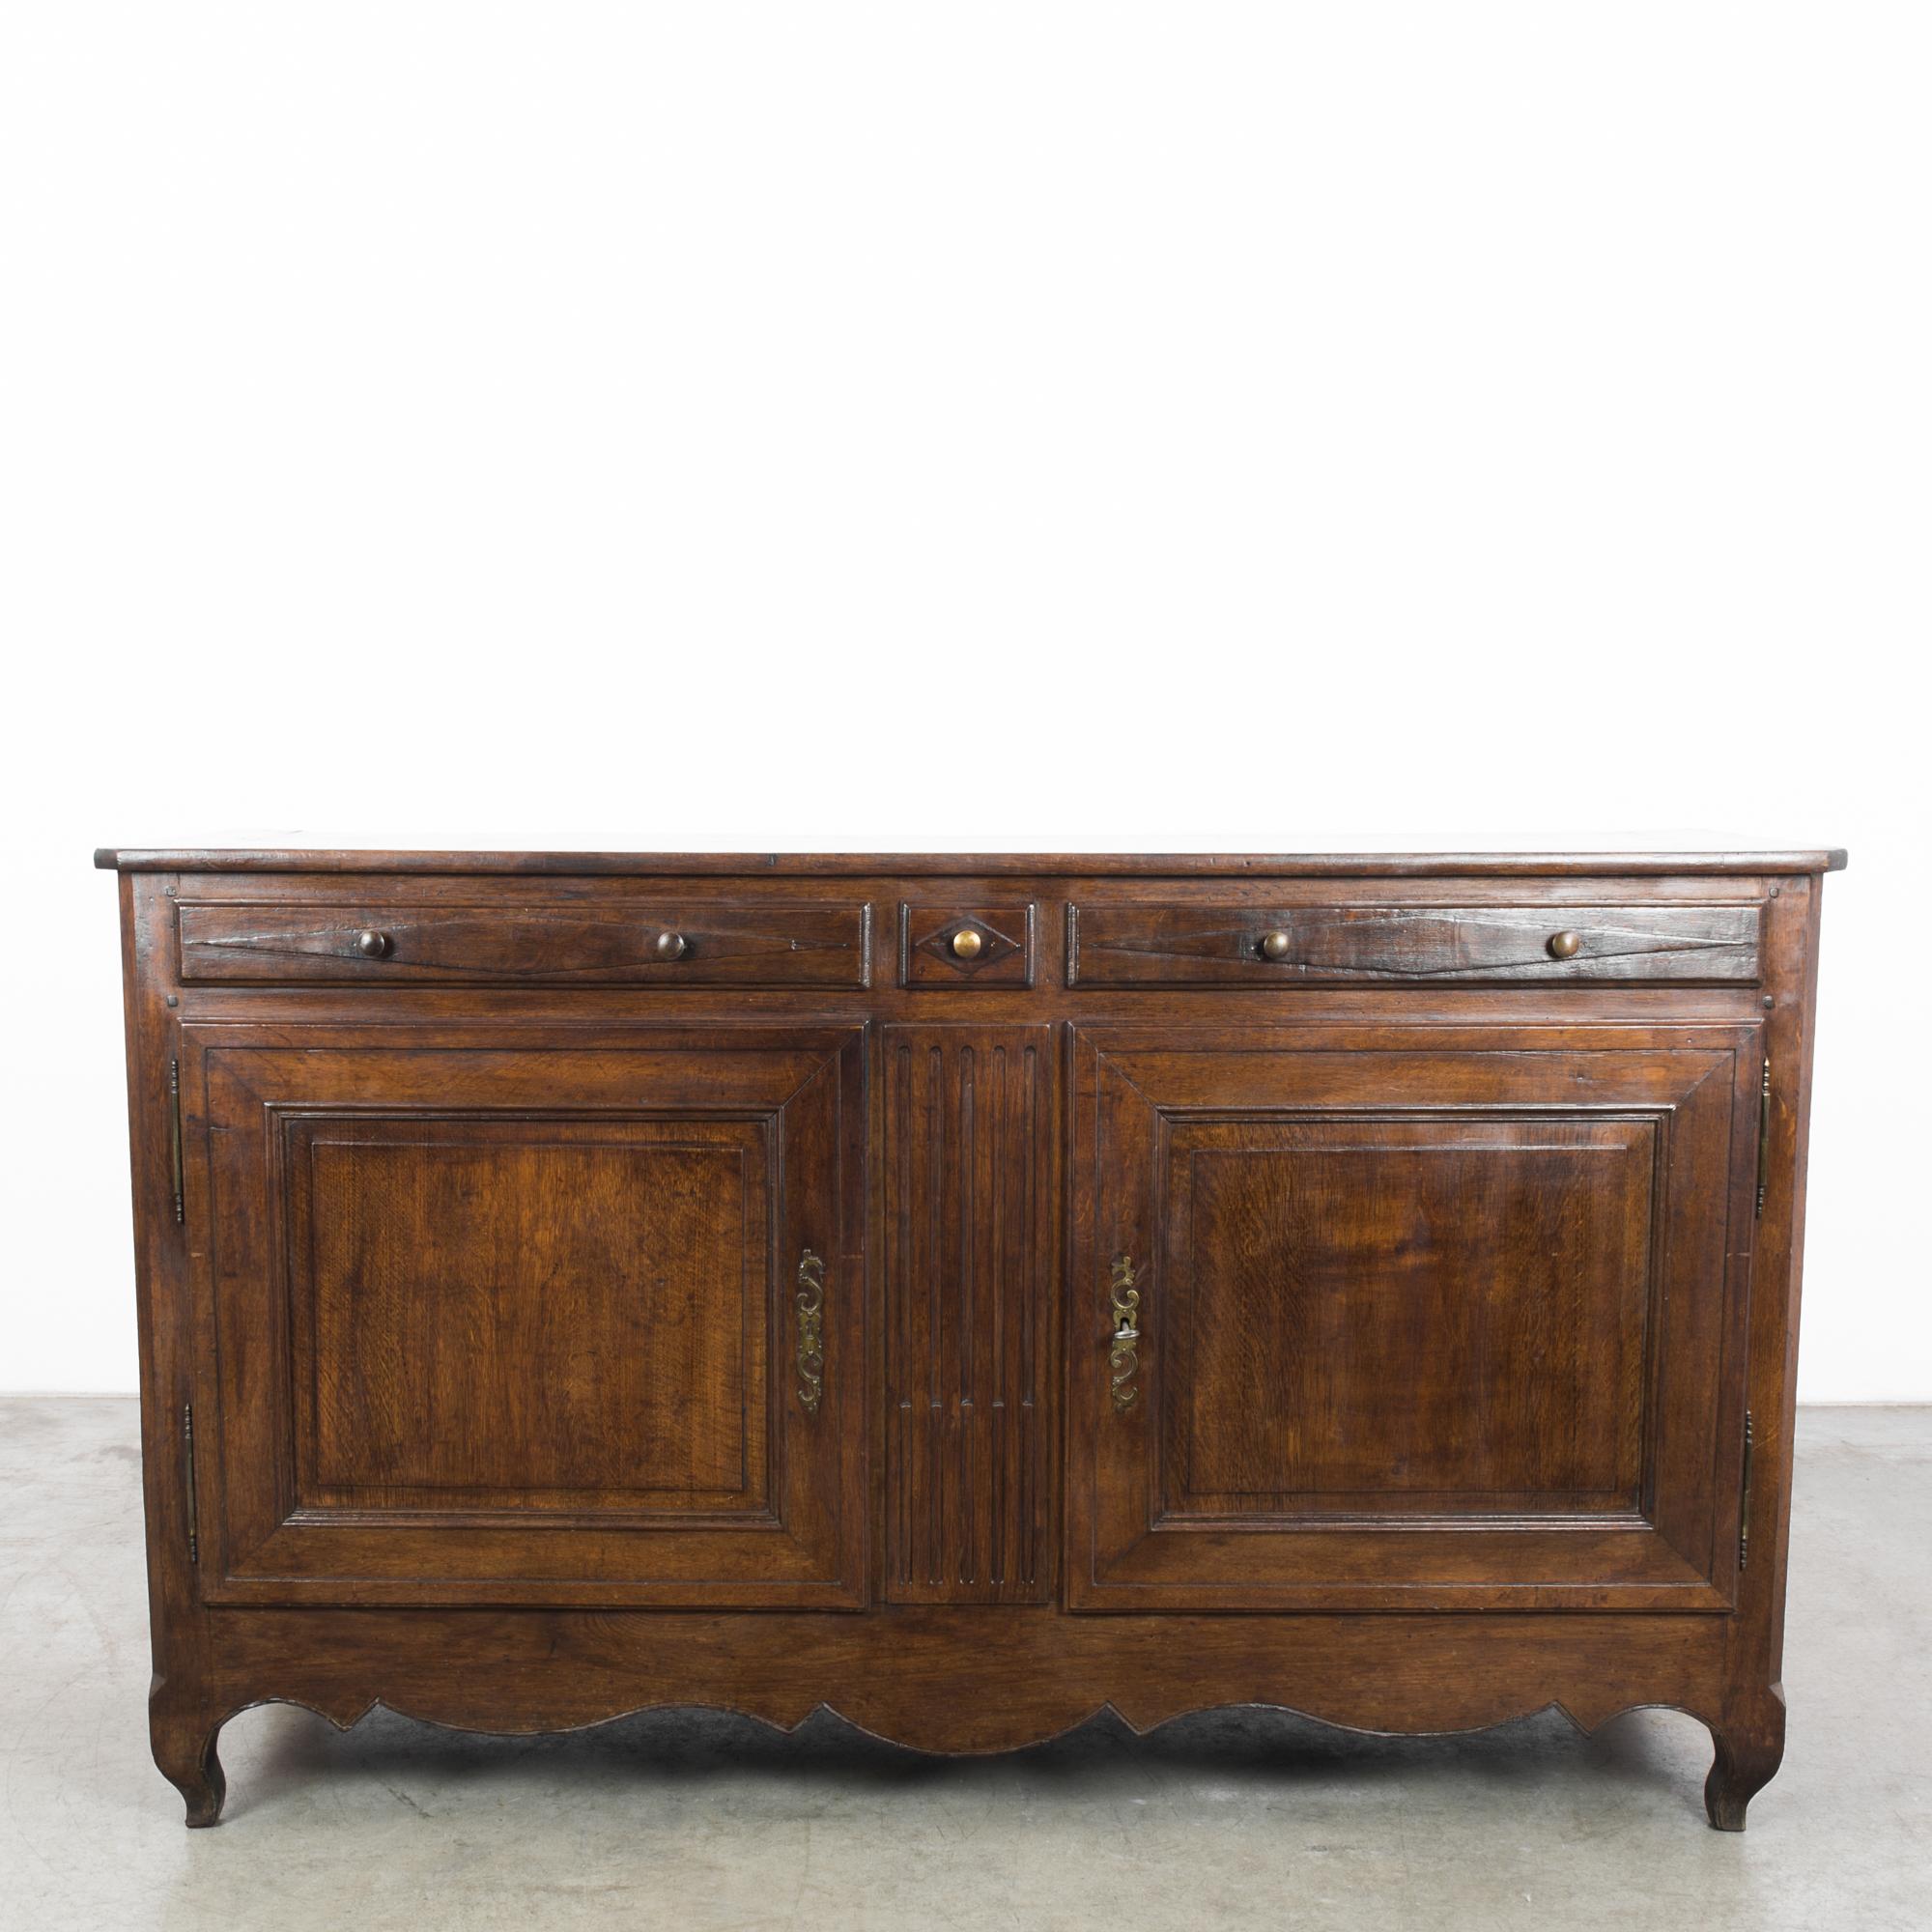 A wooden buffet from 1860s, France. A broad, low-set shape gently elevated on cabriole legs with a graceful contoured apron. The wood is a deep chocolate color, with a rich polish. Diamond accents on the drawers provide a stylish geometric note.